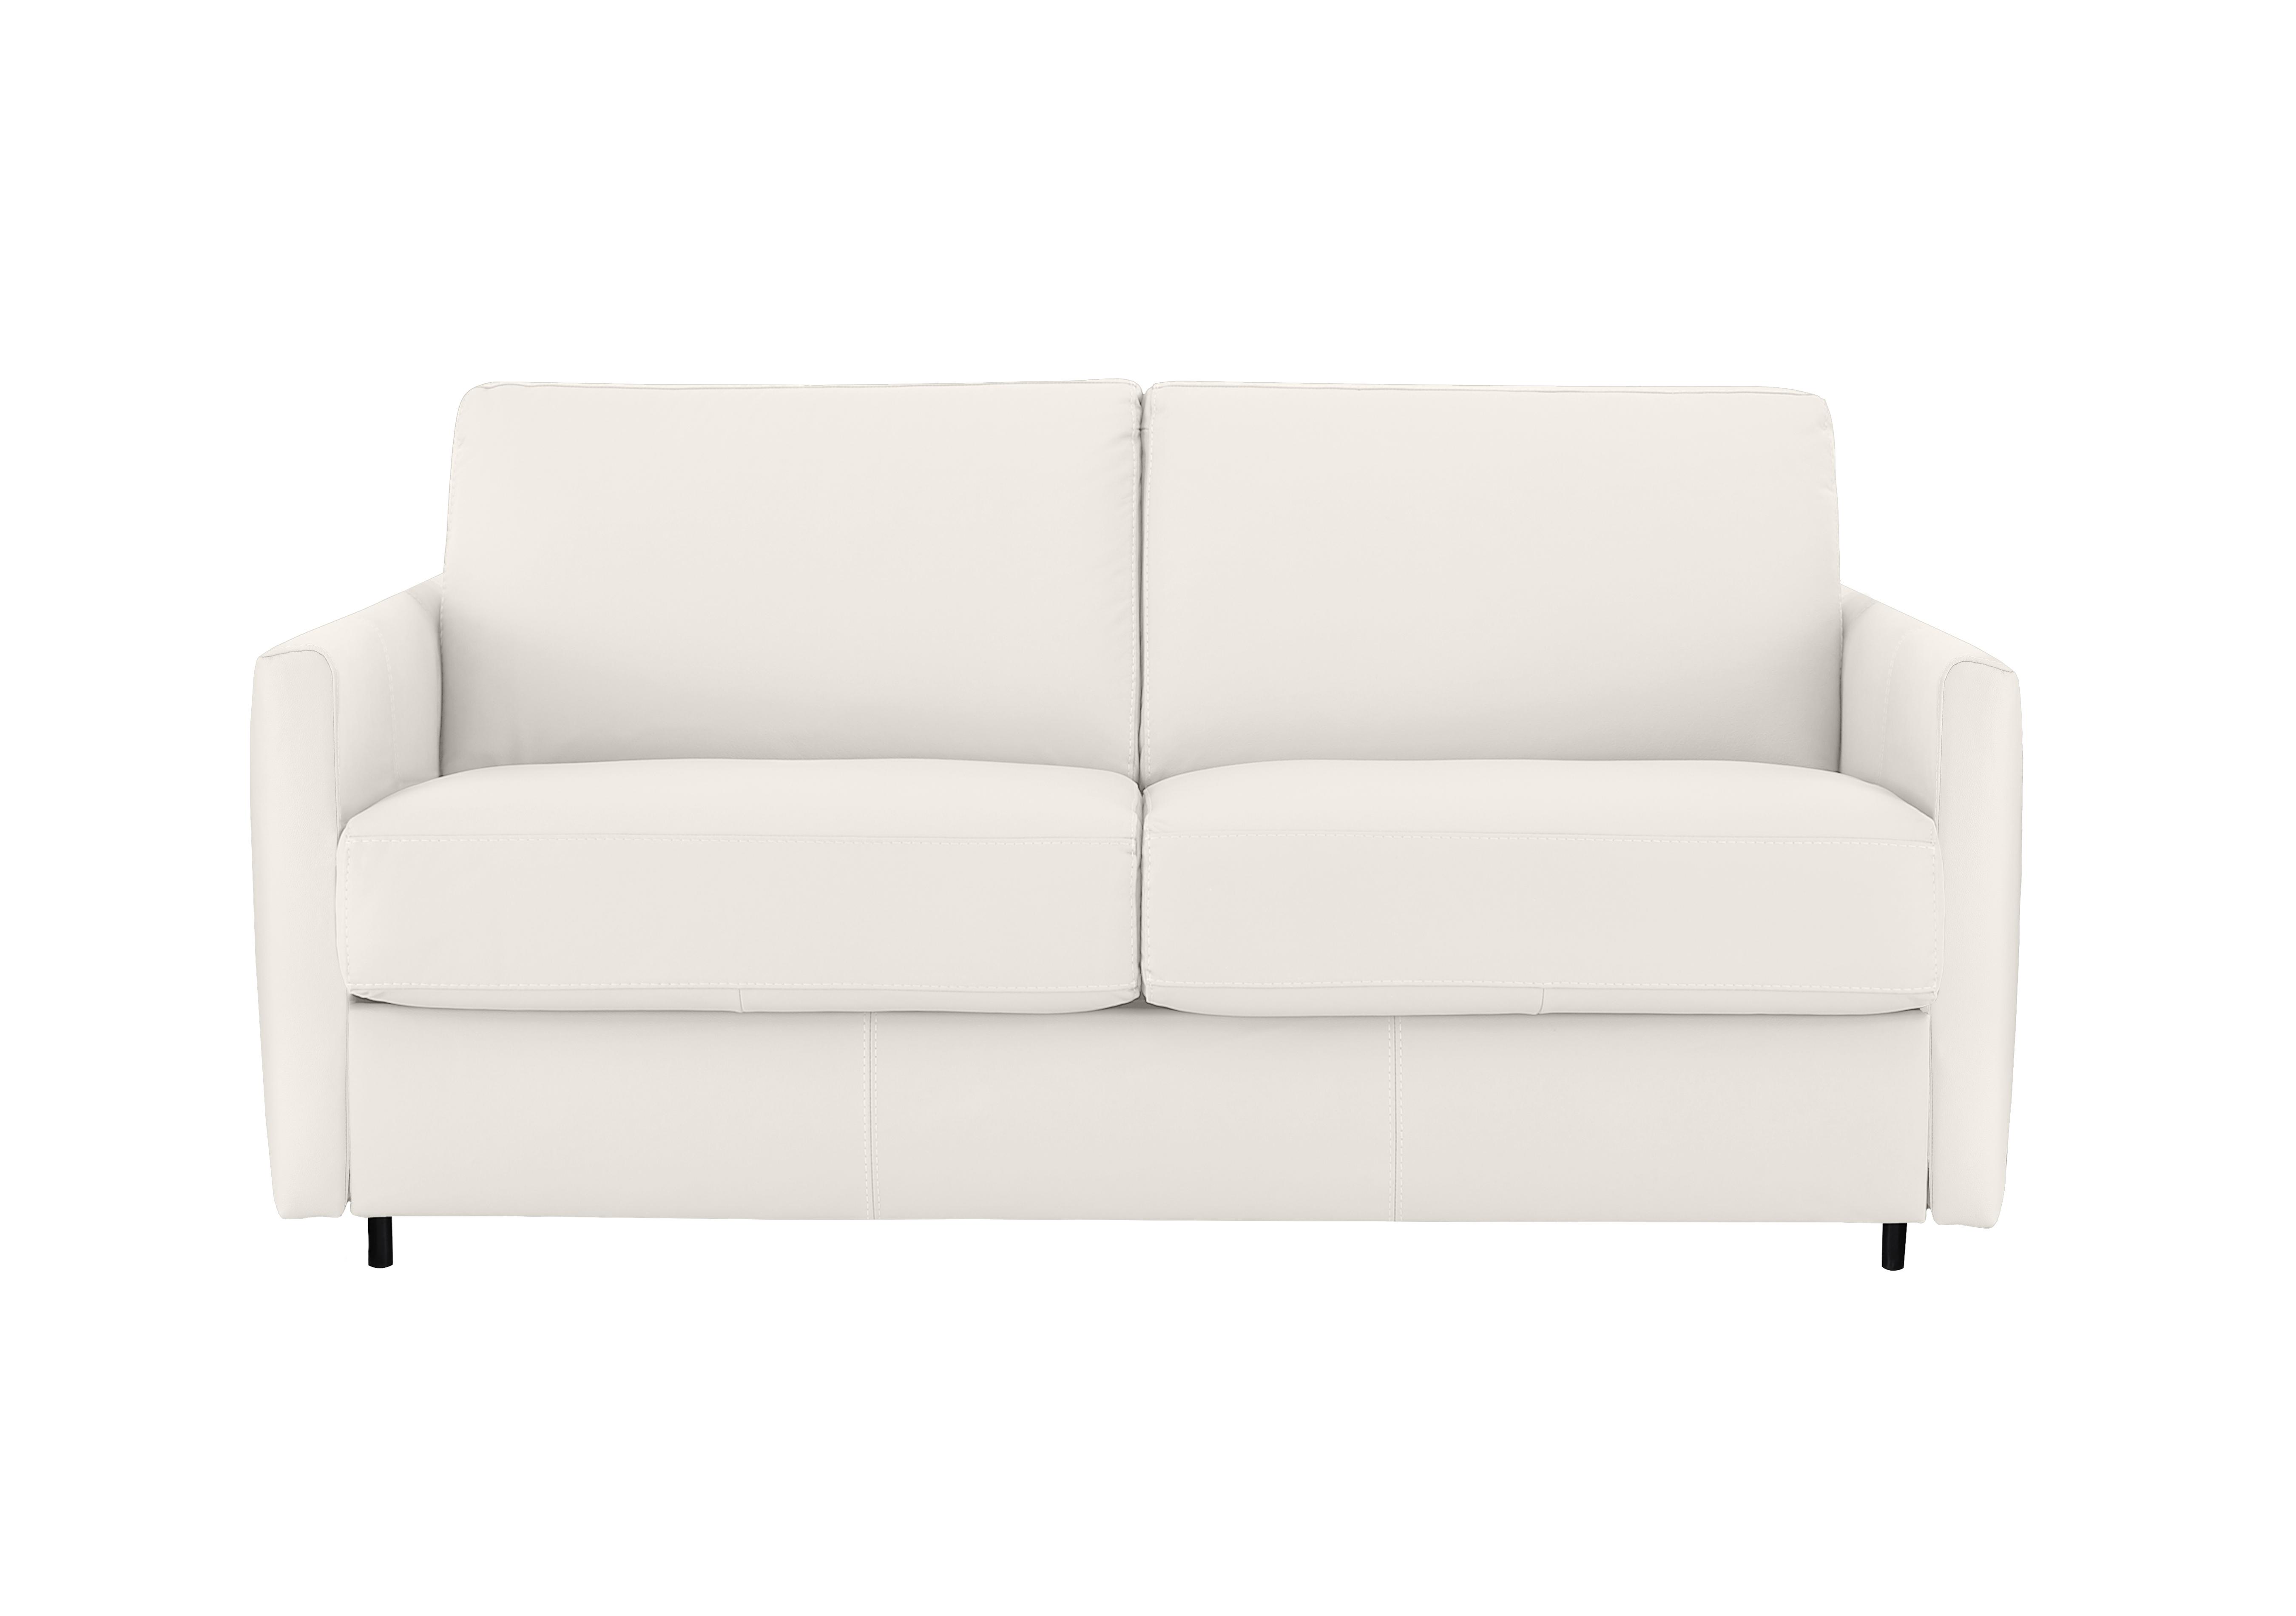 Alcova 2.5 Seater Leather Sofa Bed with Slim Arms in Torello Bianco 93 on Furniture Village